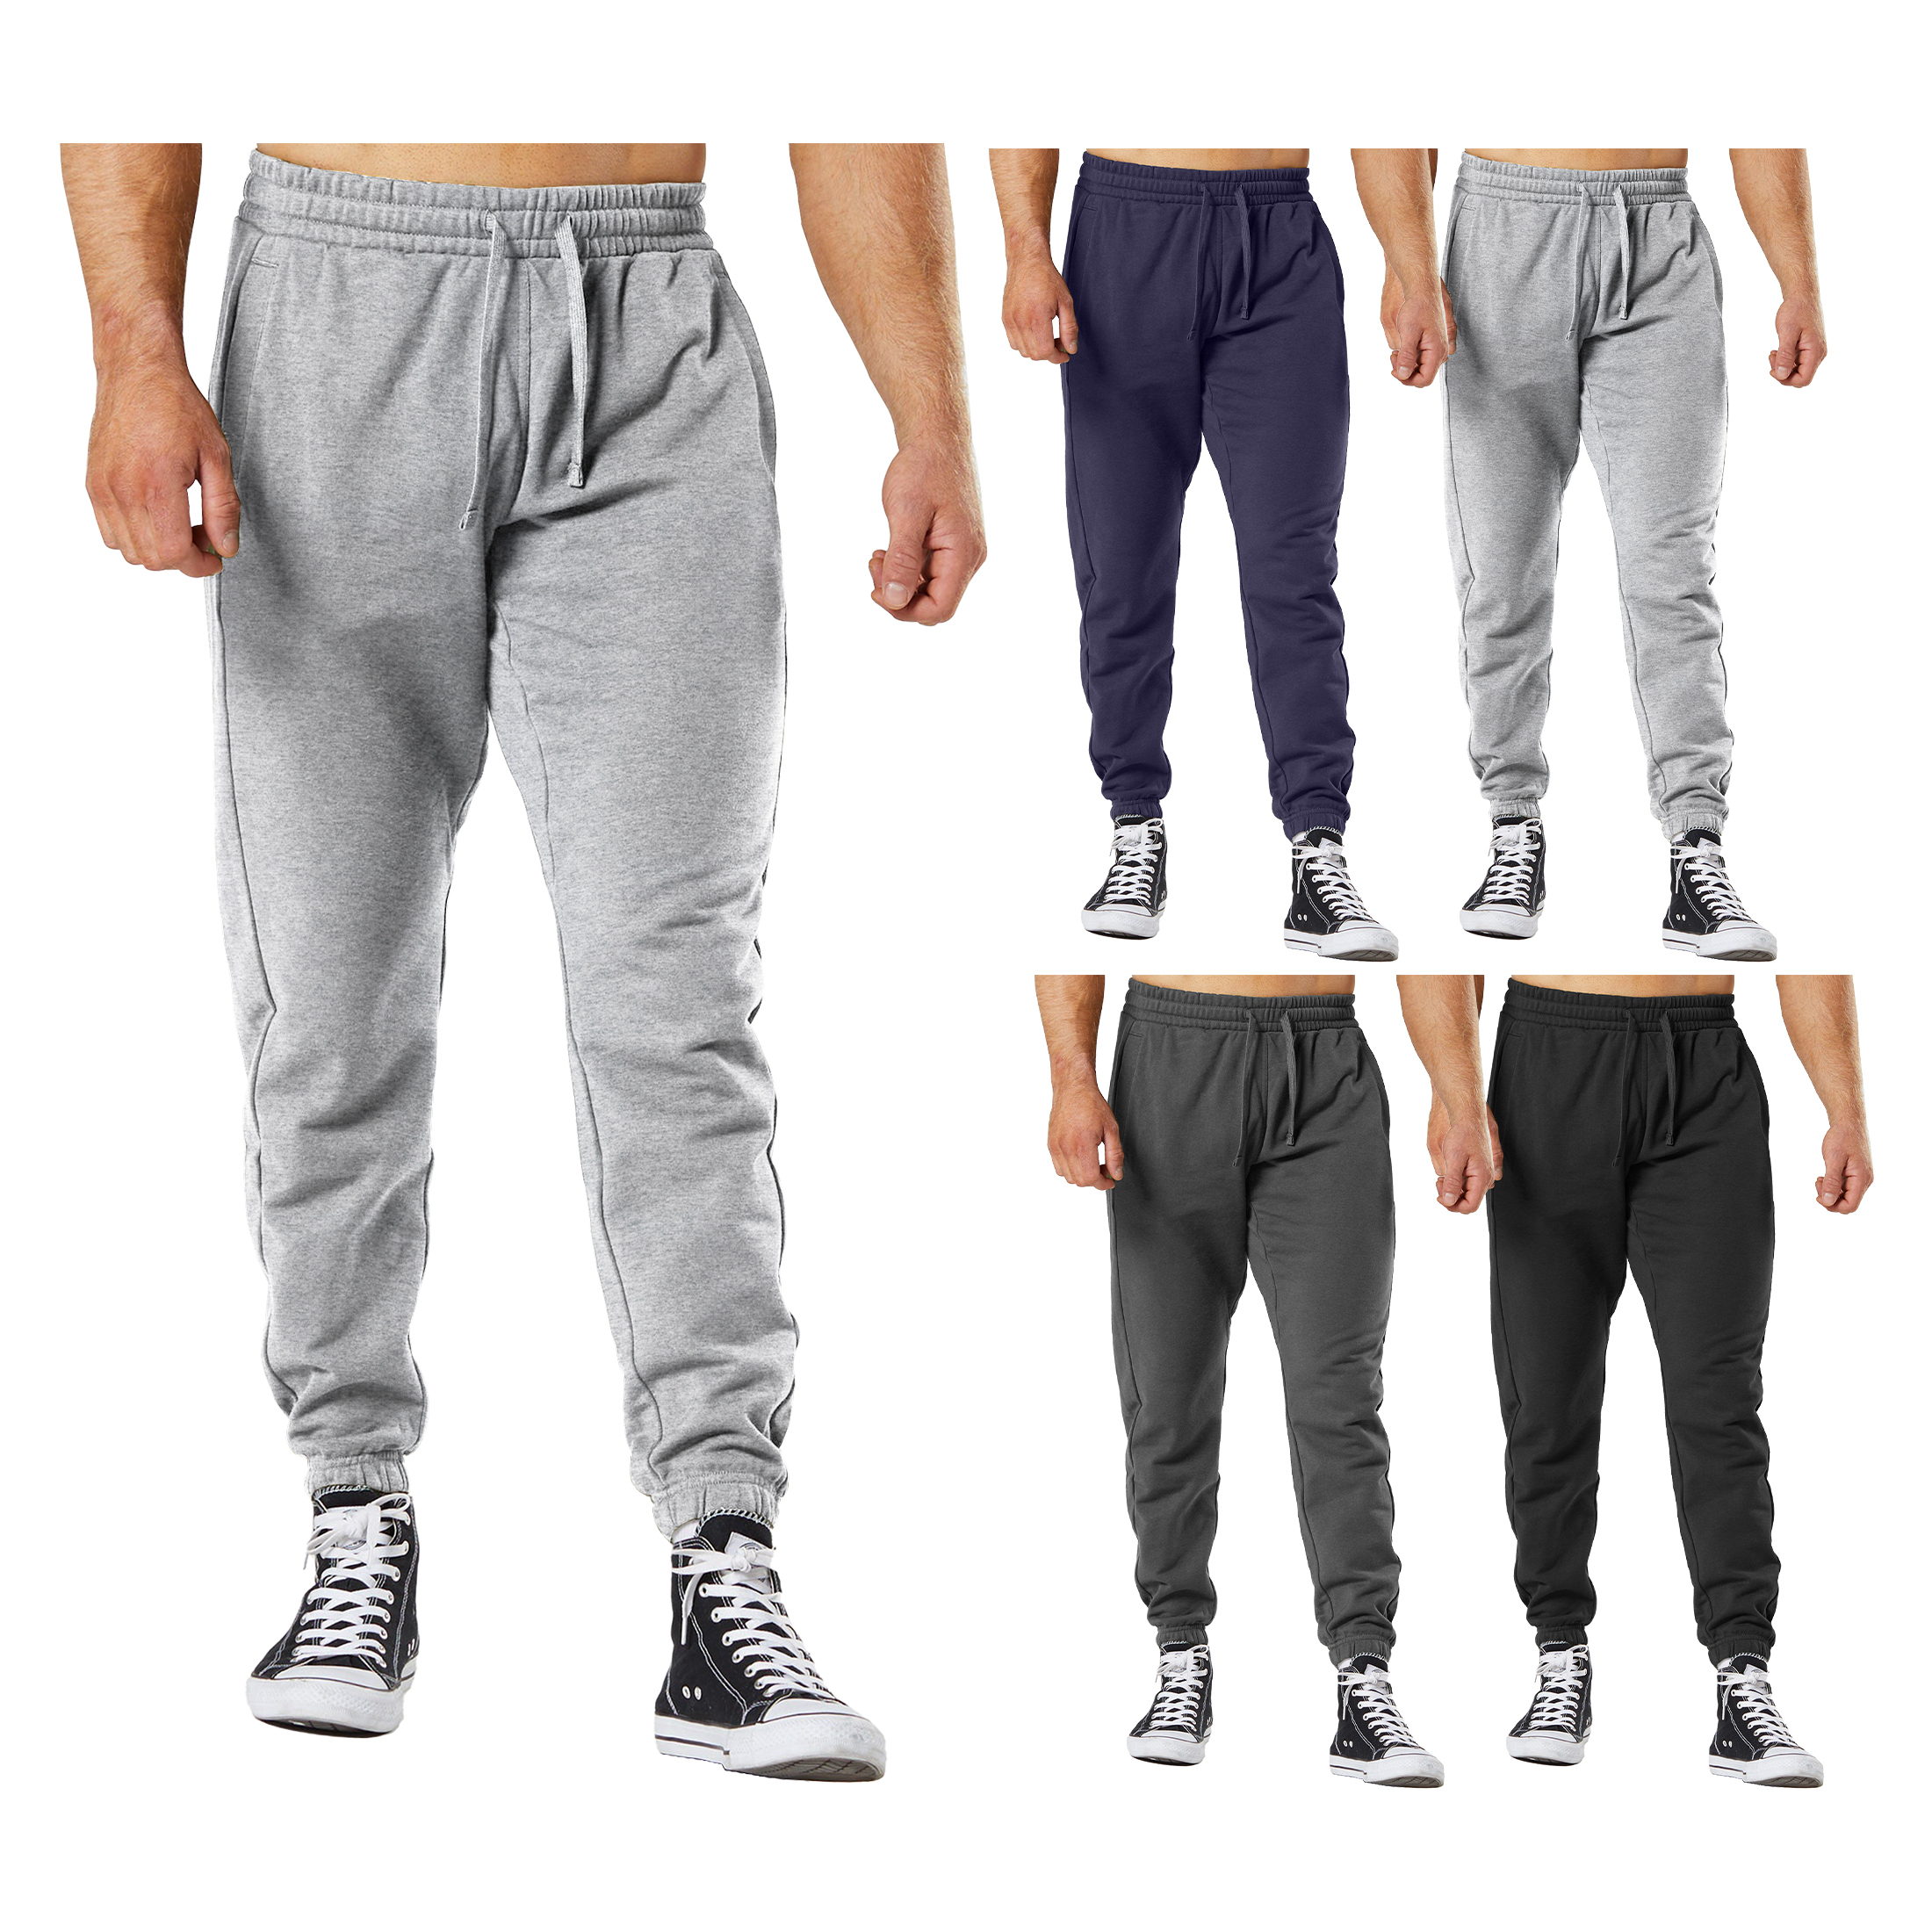 3-Pack: Men's Casual Fleece-Lined Elastic Bottom Jogger Pants With Pockets - Small